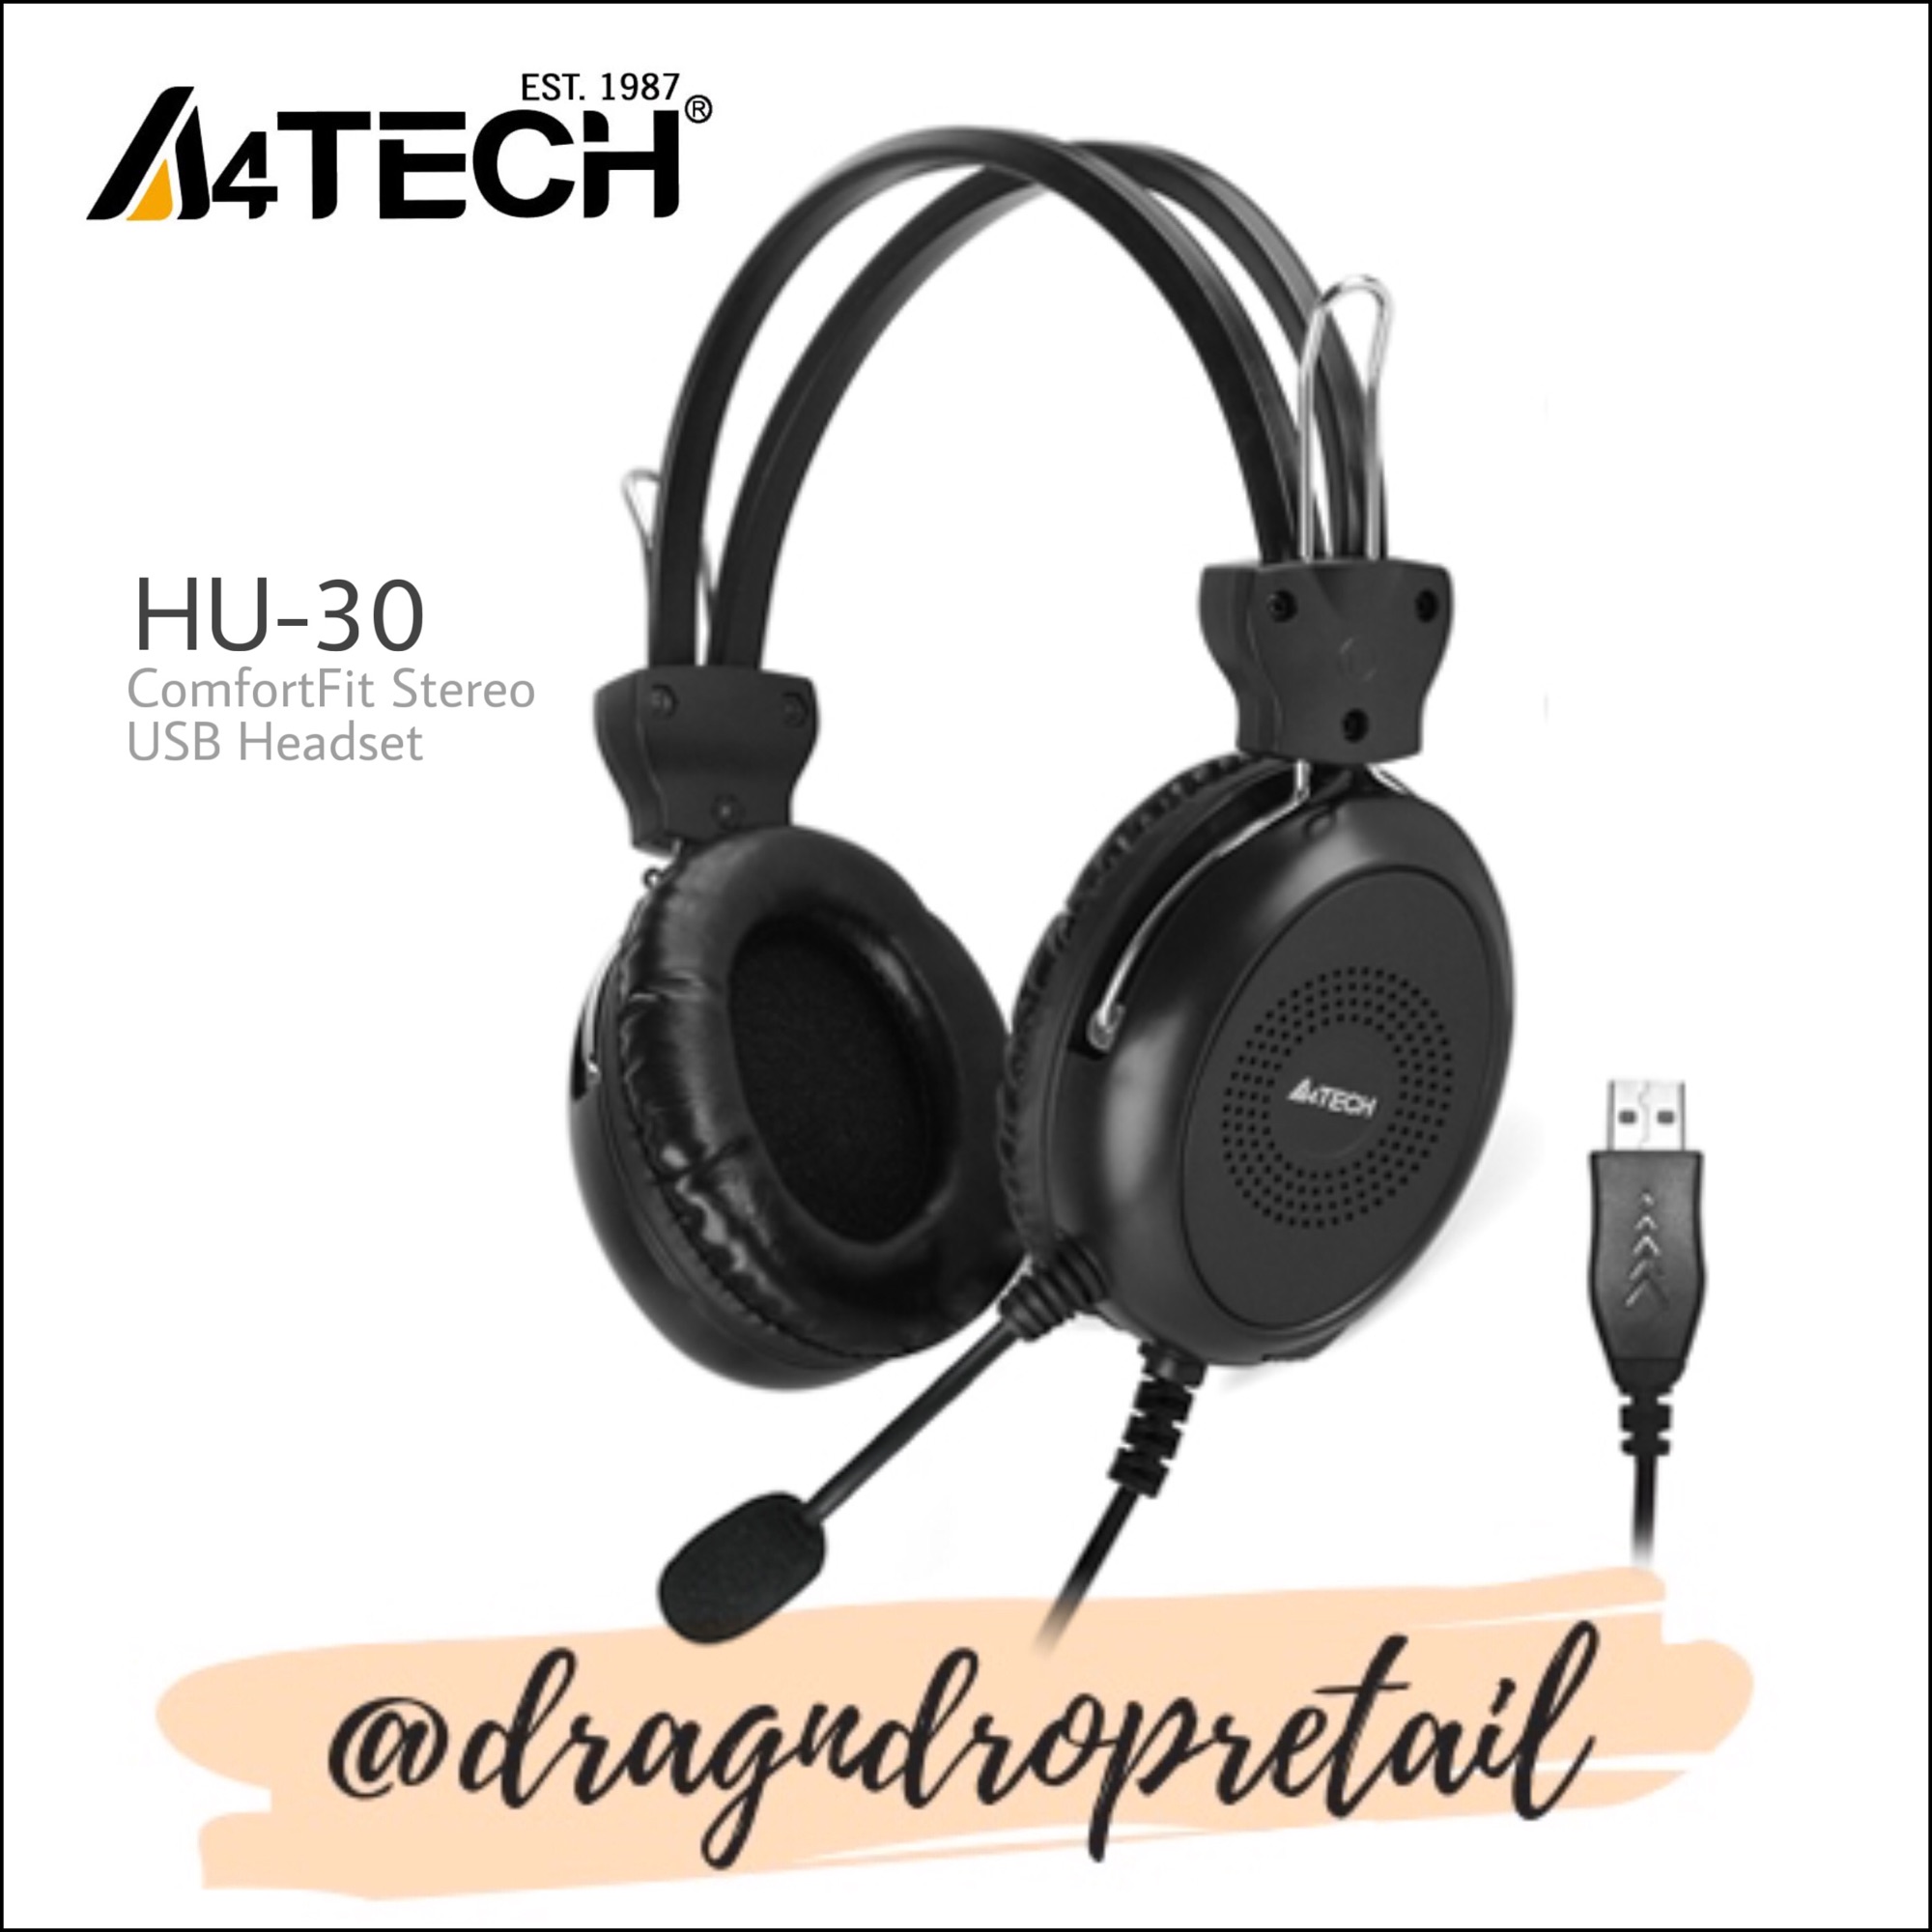 A4TECH ComfortFit Stereo USB Headset with Microphone